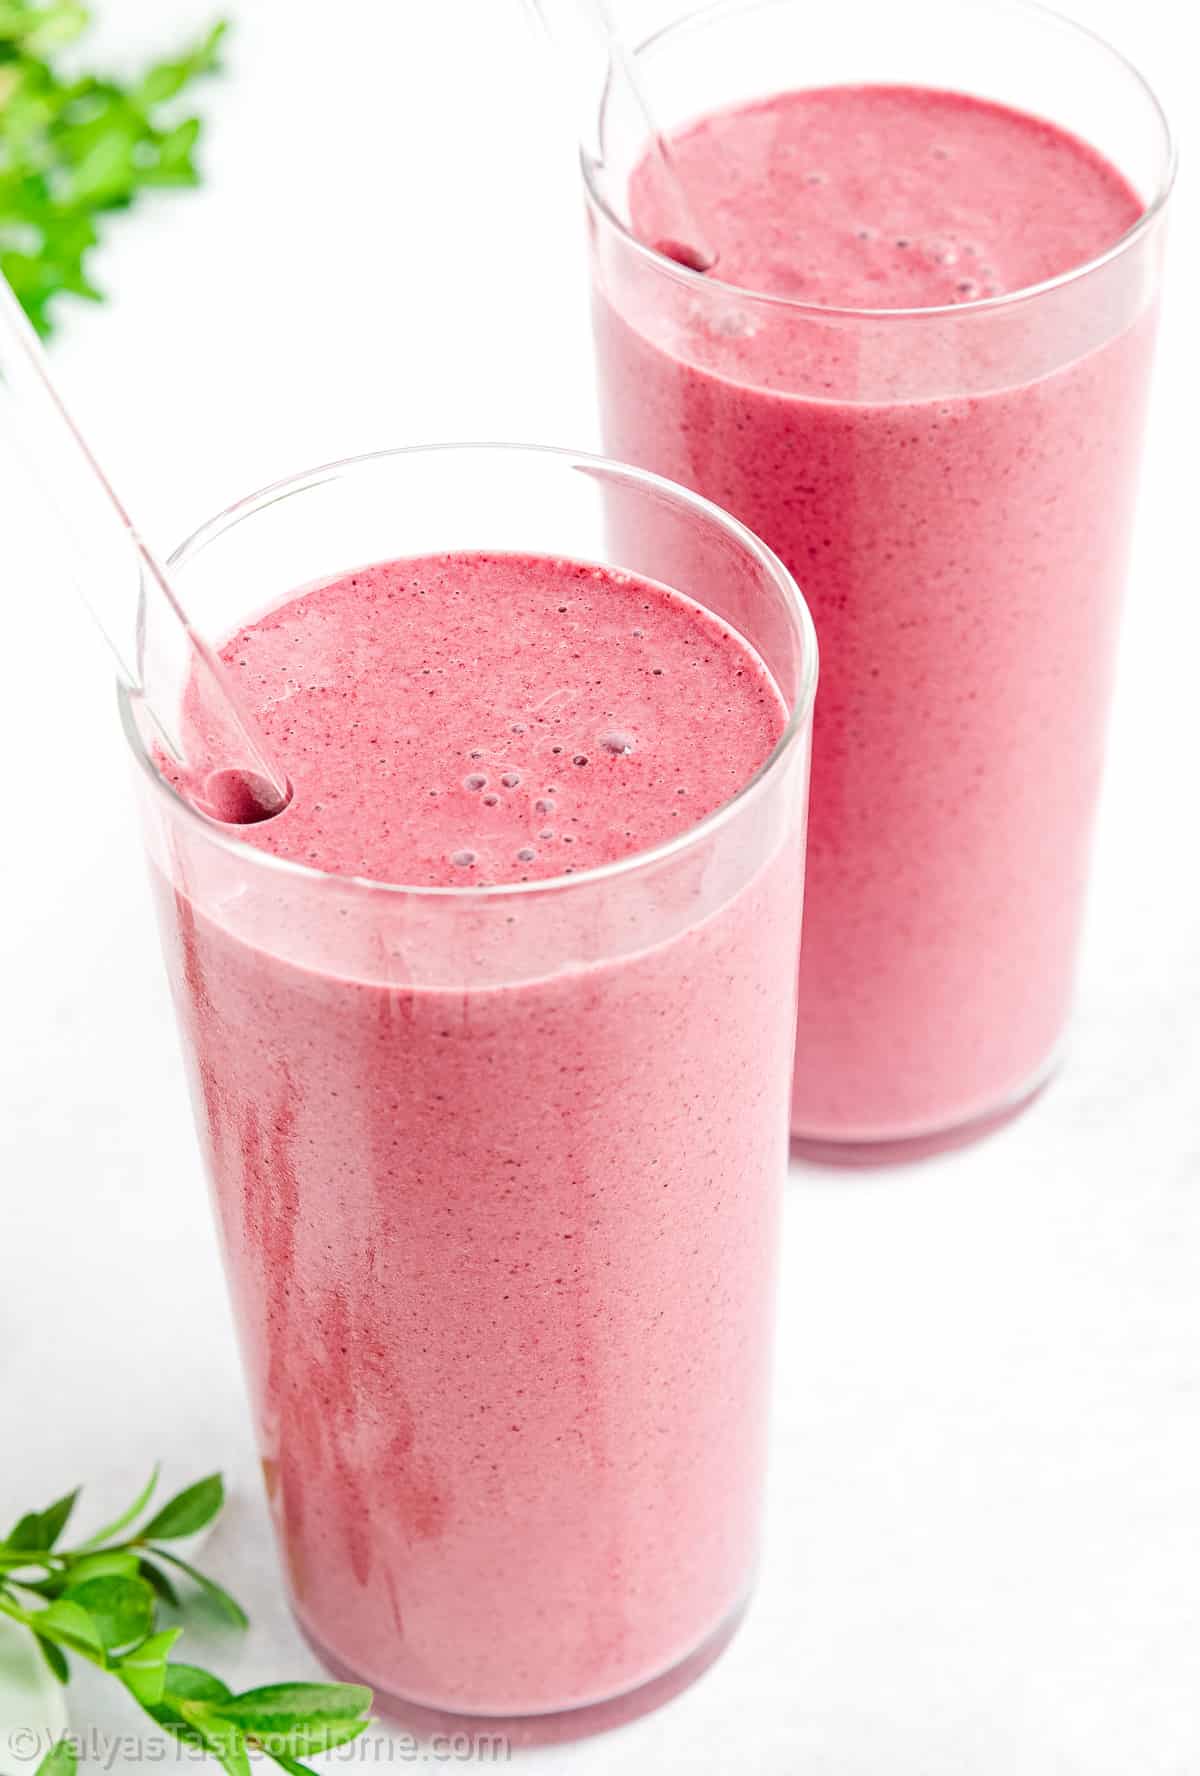 A berry smoothie recipe is a delicious, refreshing, and nutritious blend of various types of berries, dairy or dairy-free milk, and sweeteners. 